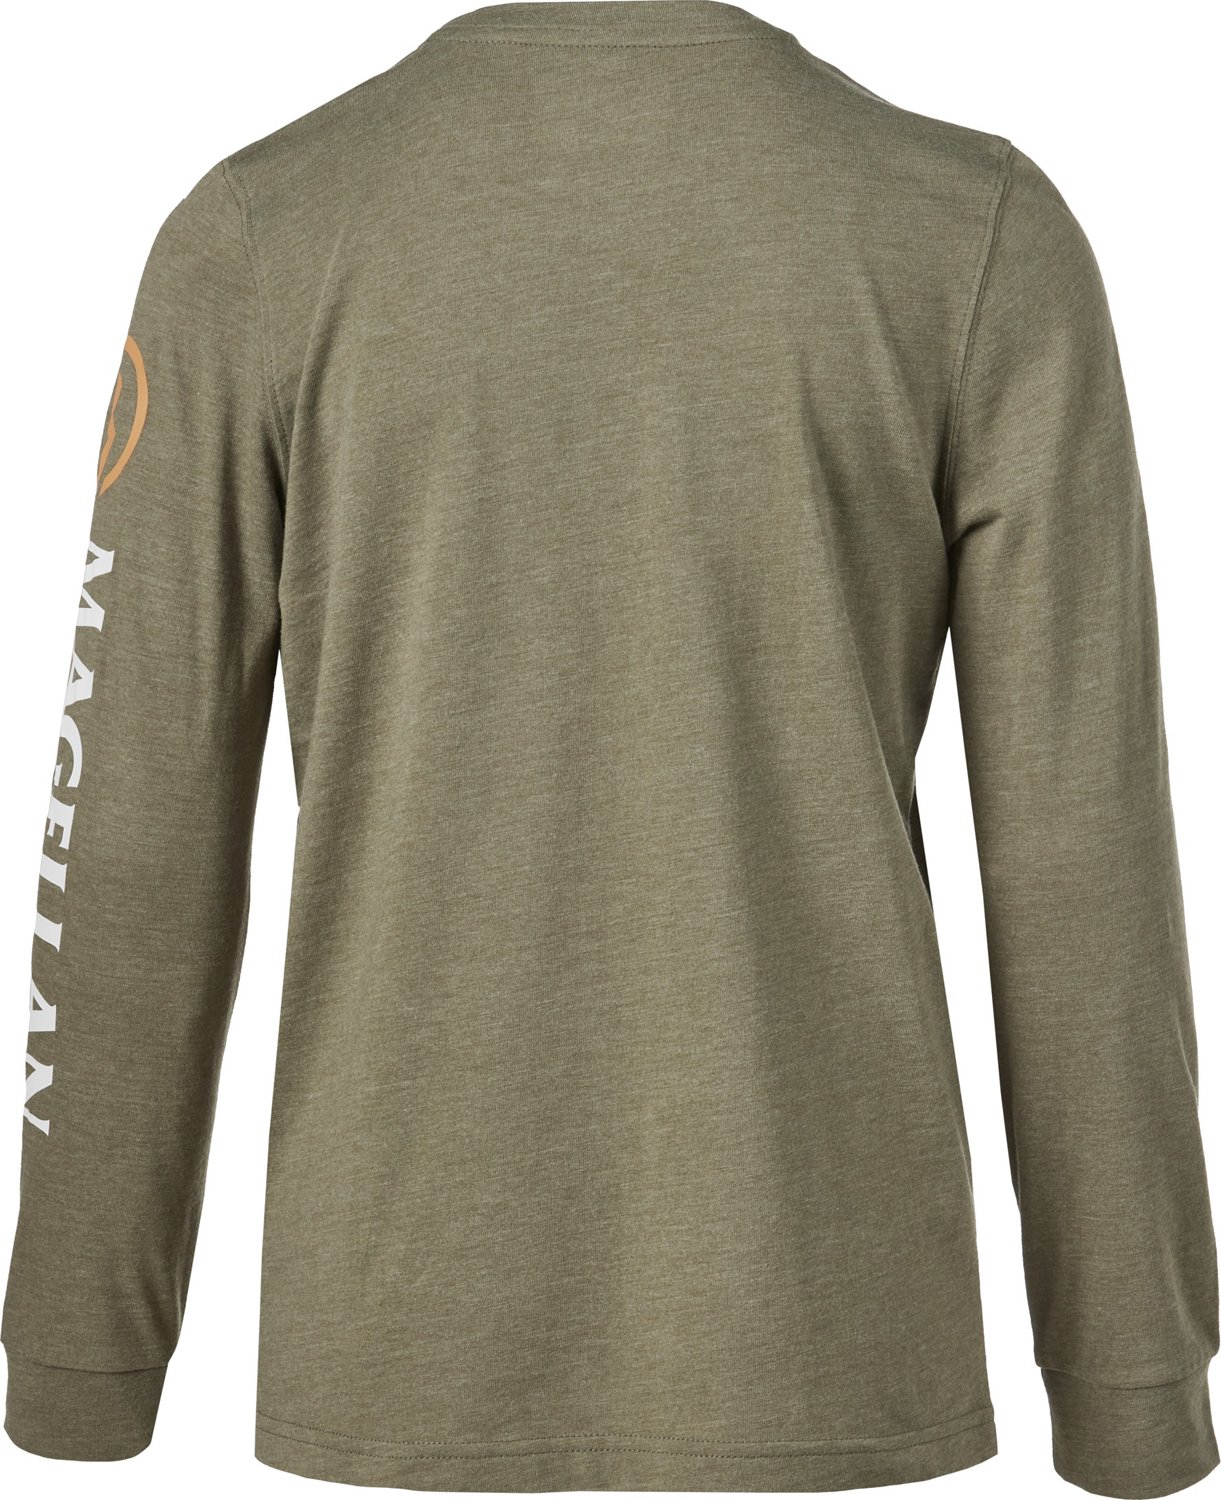 Magellan Outdoors, Shirts, Long Sleeve Magellan Outdoors Grotto Falls Tee  In The Color Beach Glass